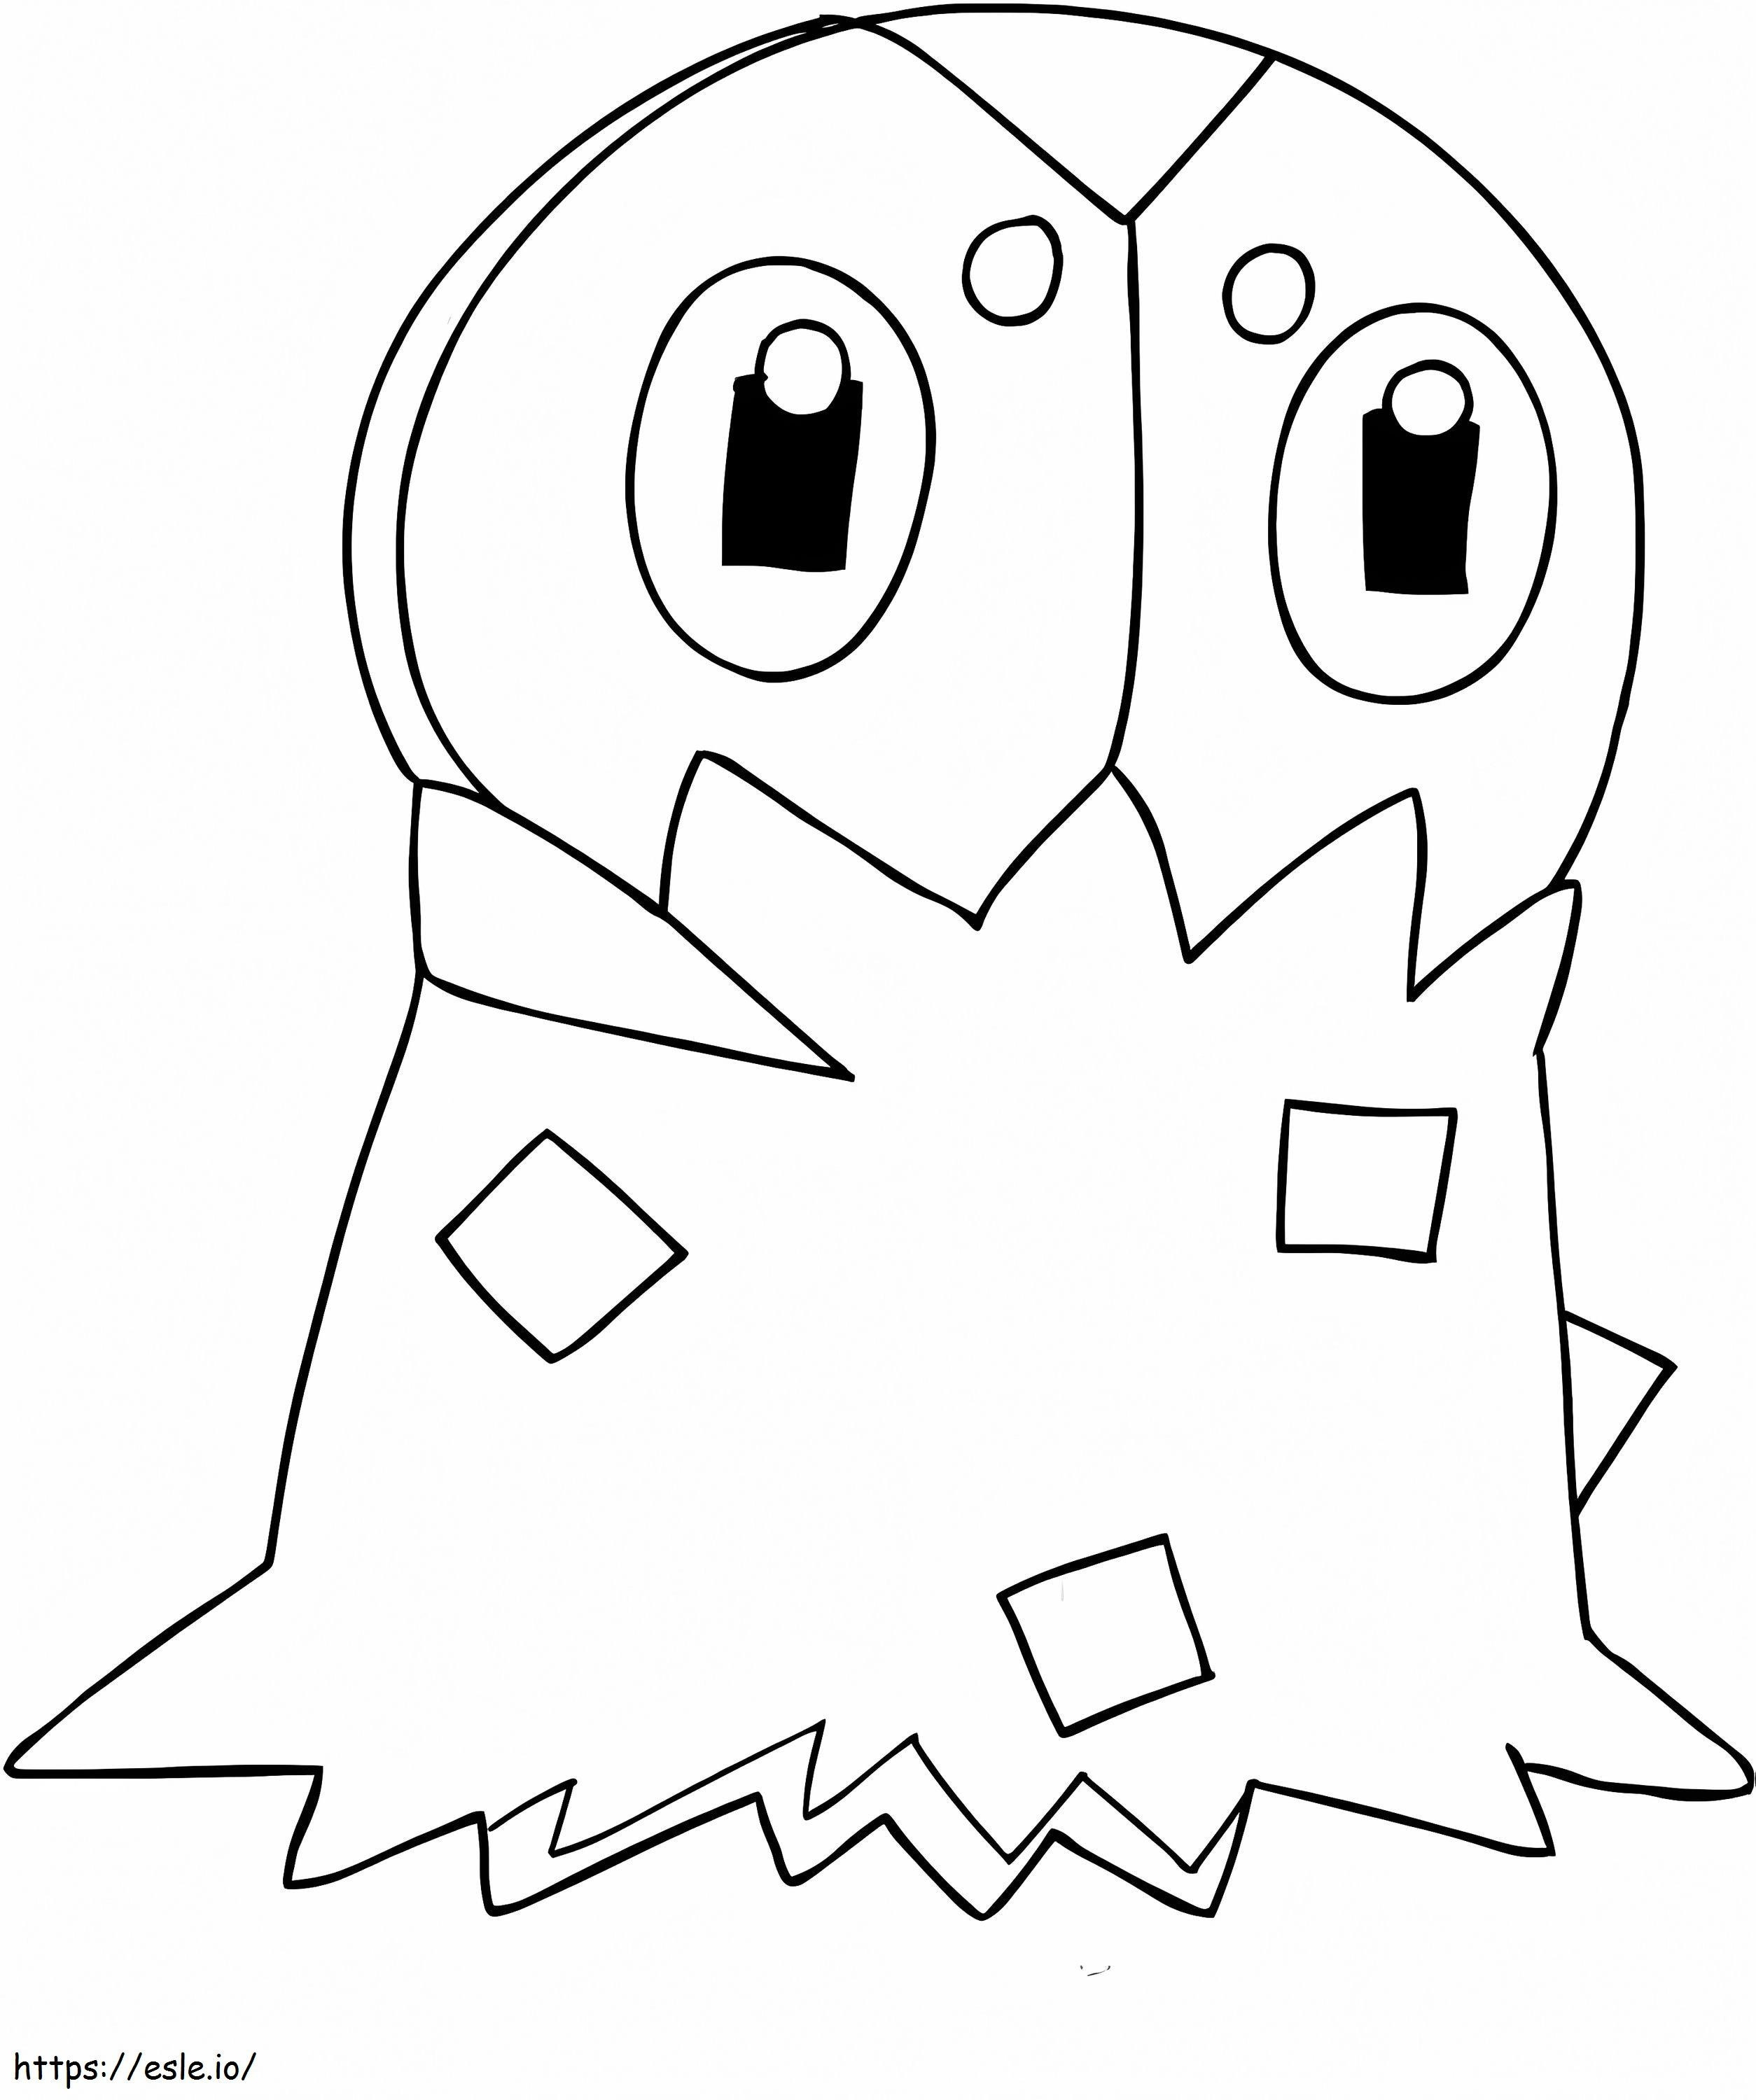 Spewpa 2 coloring page